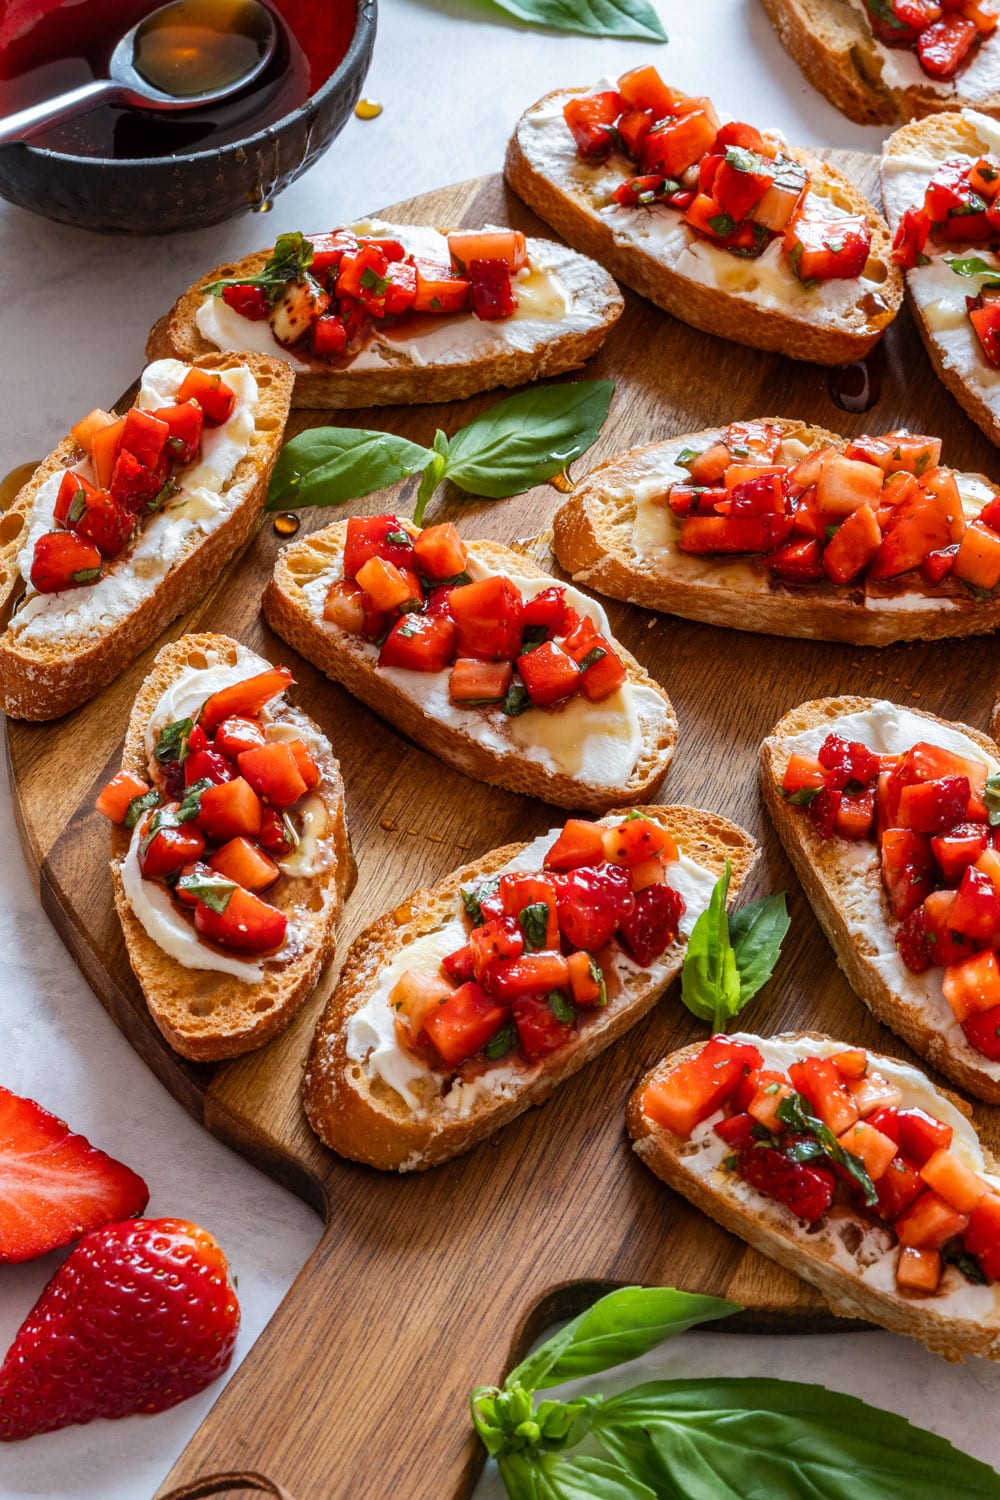 Strawberry bruschetta with fresh basil leaves on a wooden tray.